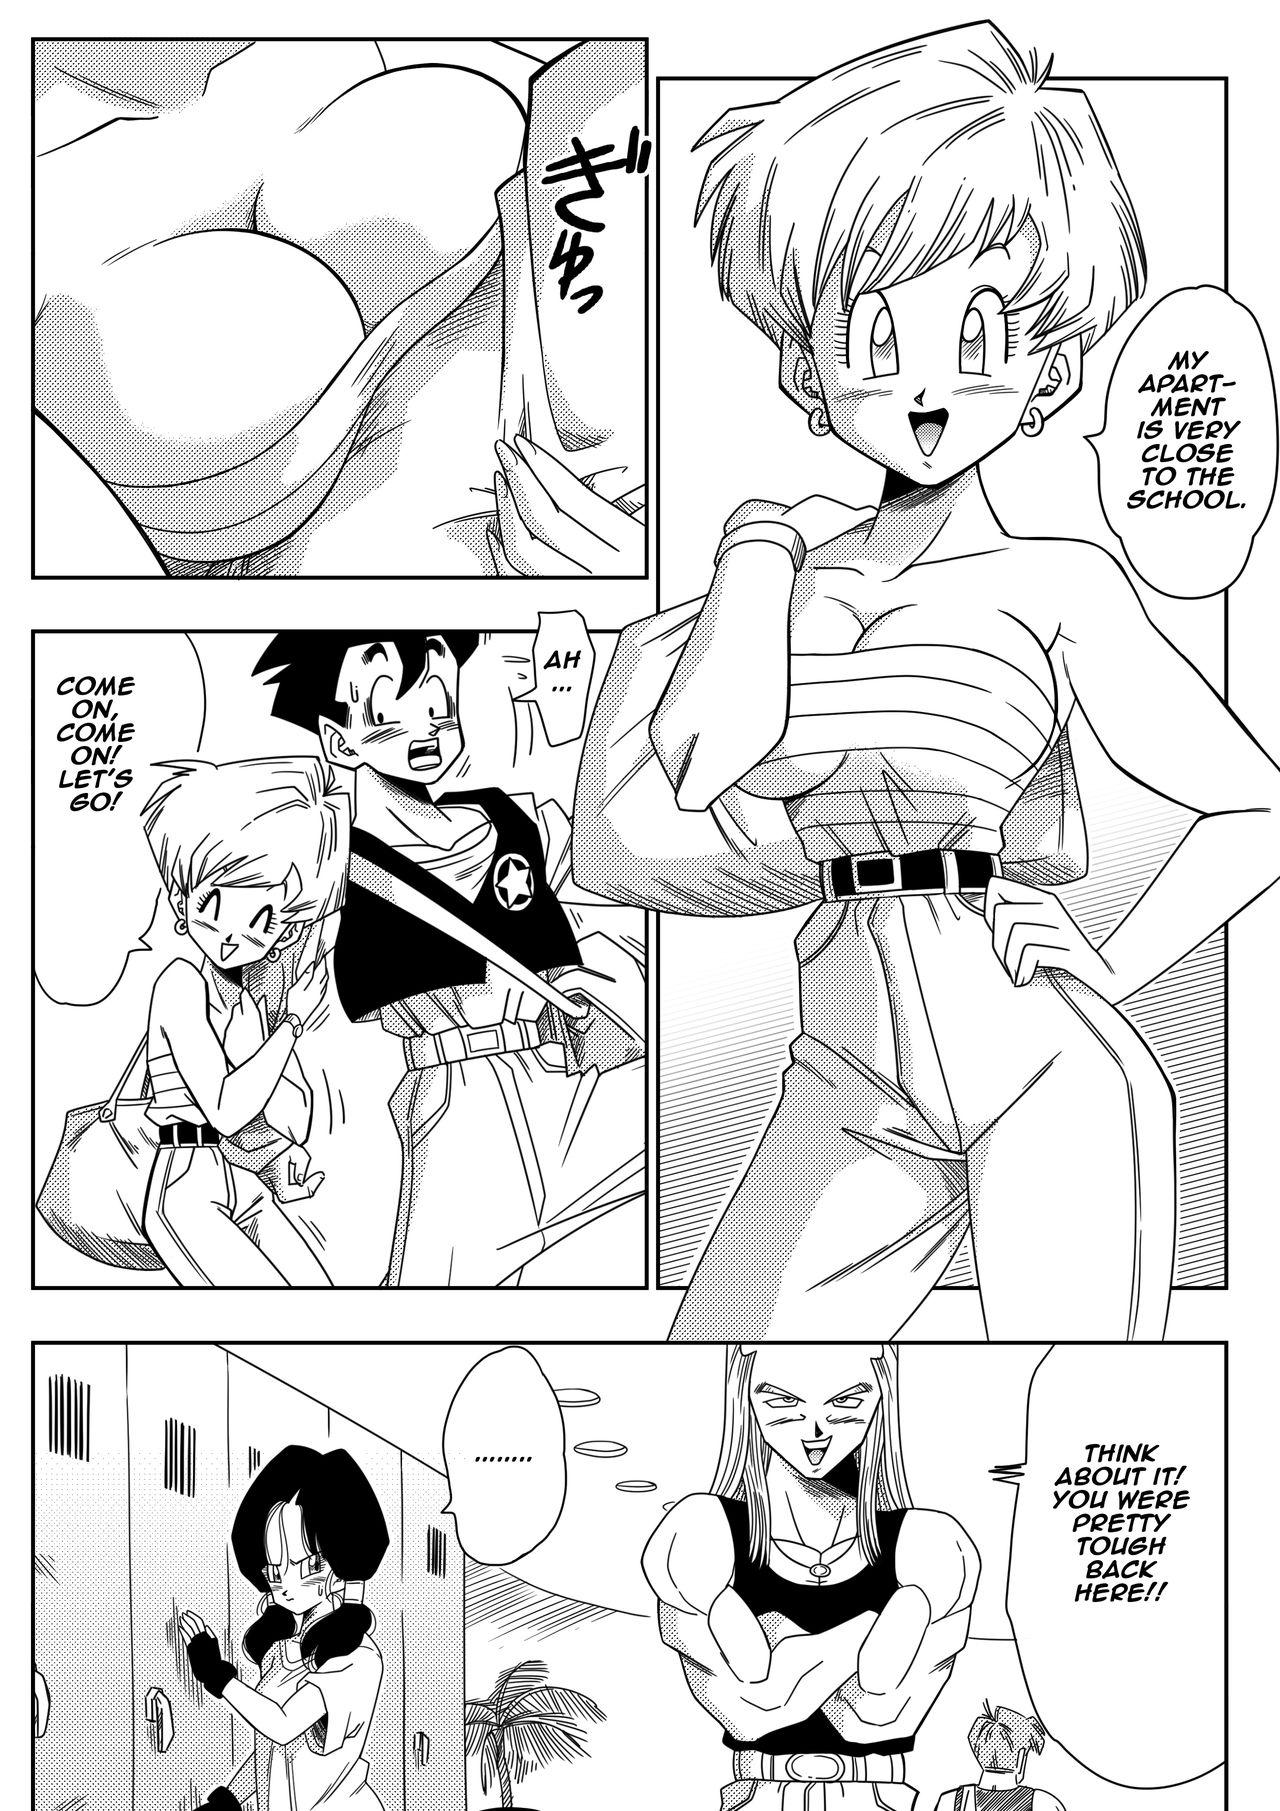 Passion LOVE TRIANGLE Z - Gohan, Erasa to Deau - Dragon ball z Cunt - Page 4